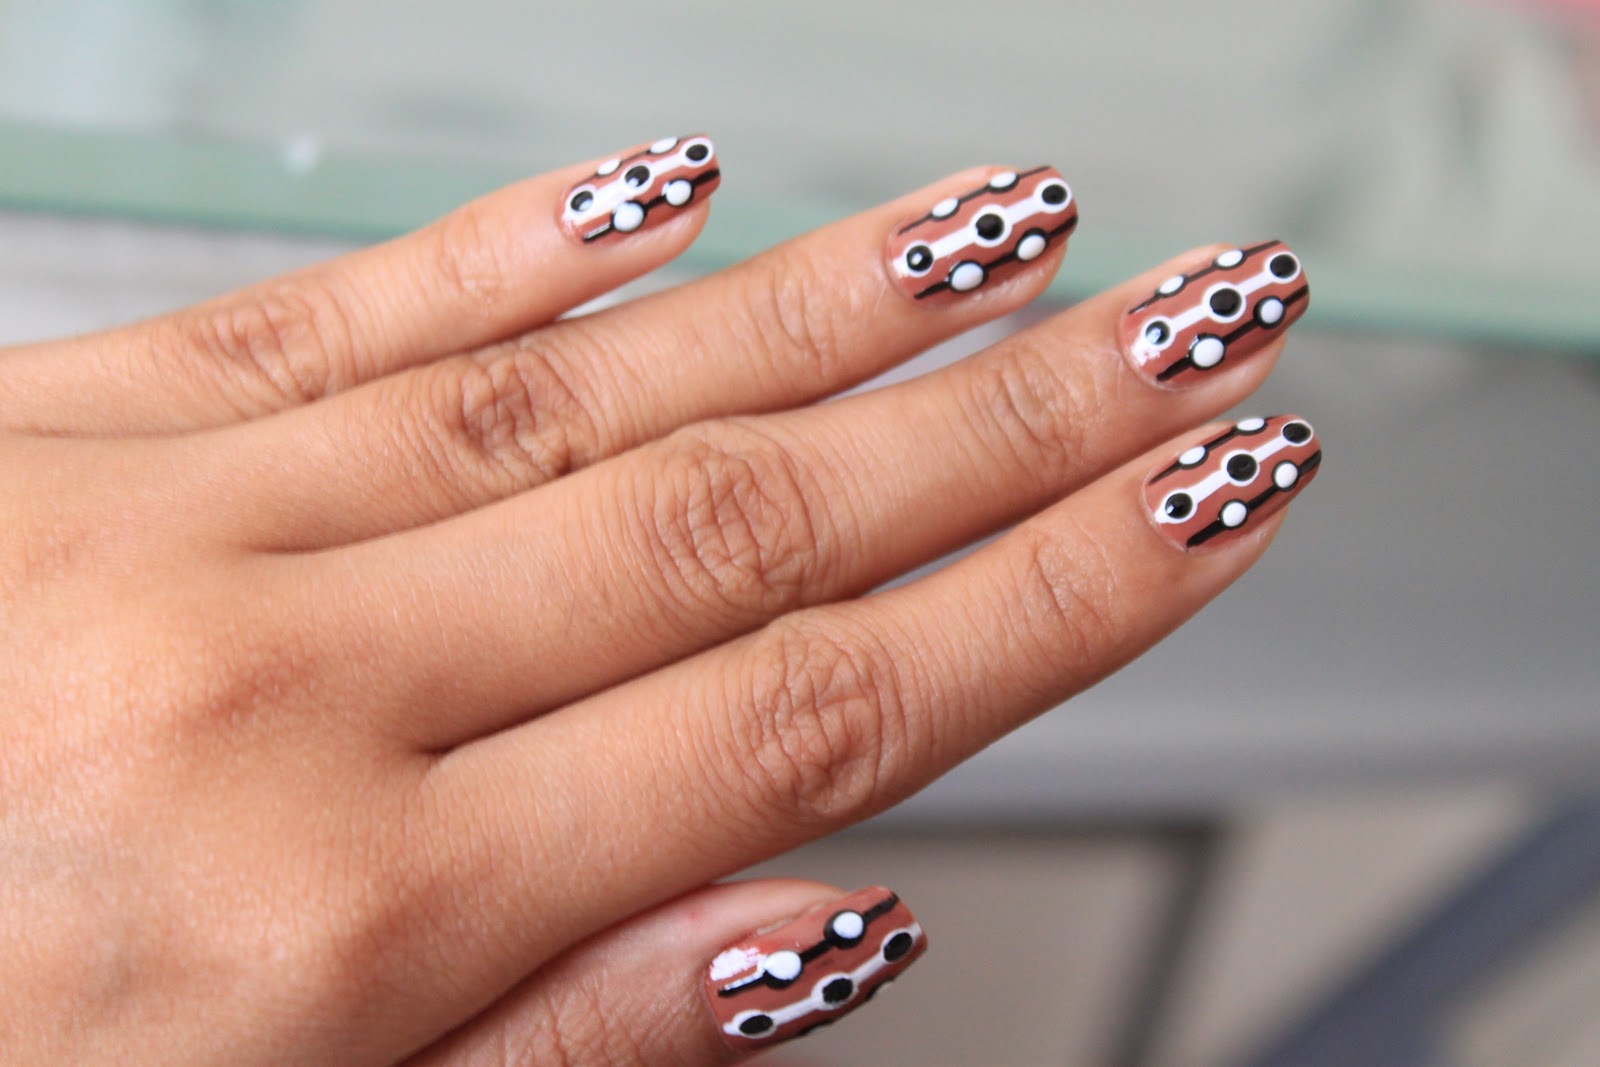 9. Swirled Abstract Nail Design - wide 4